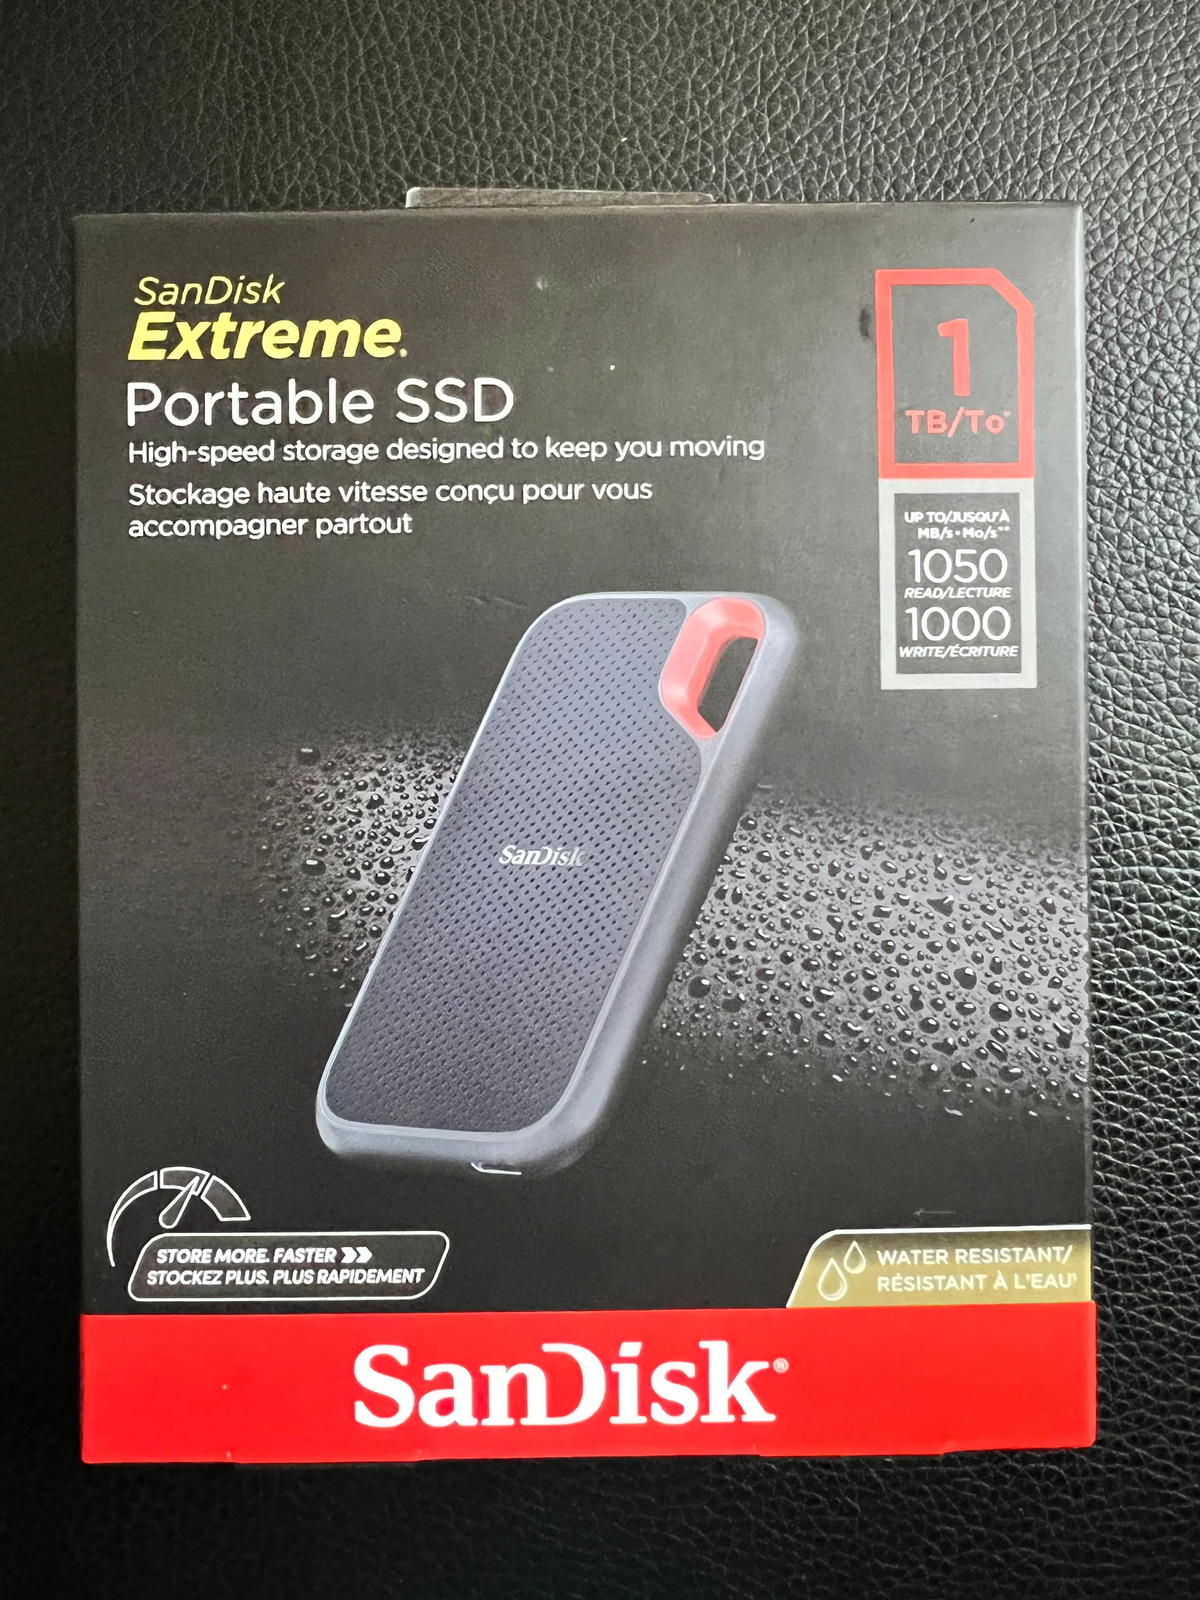 Review SanDisk Extreme Portable SSD 1TB